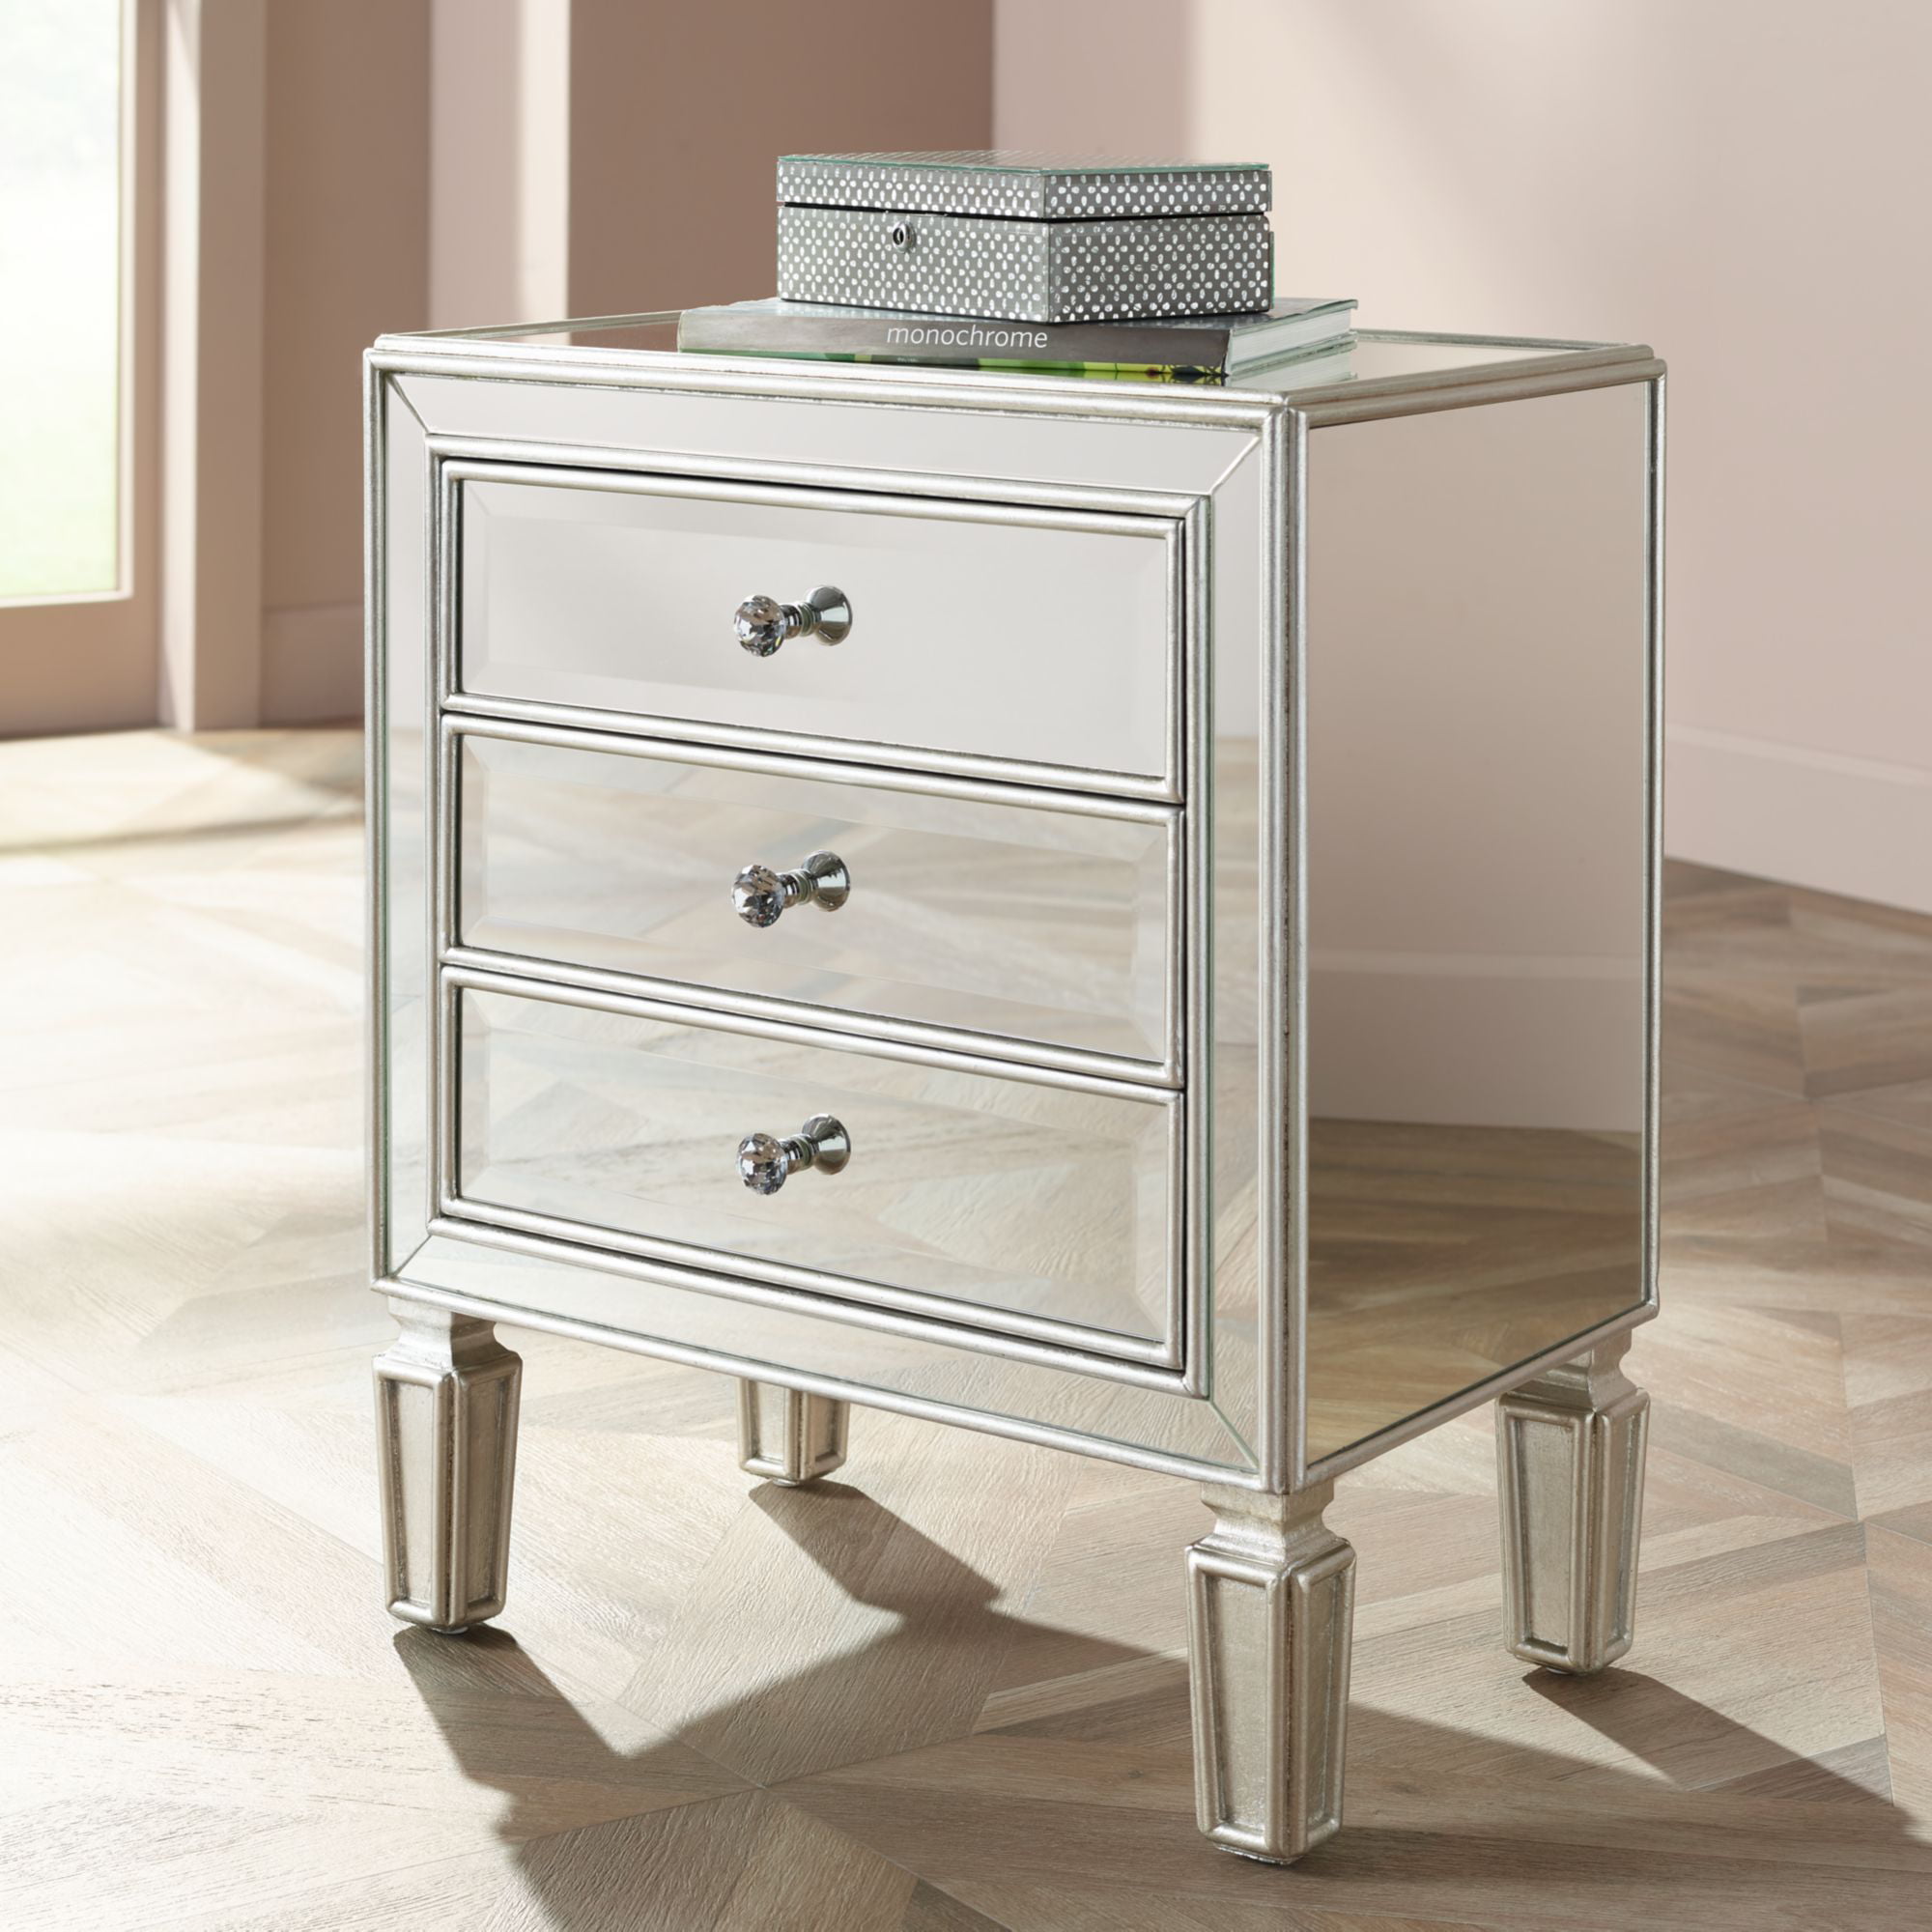 3 Drawer Clear Glass Mirrored Chest of Drawers With Beveled Edges 